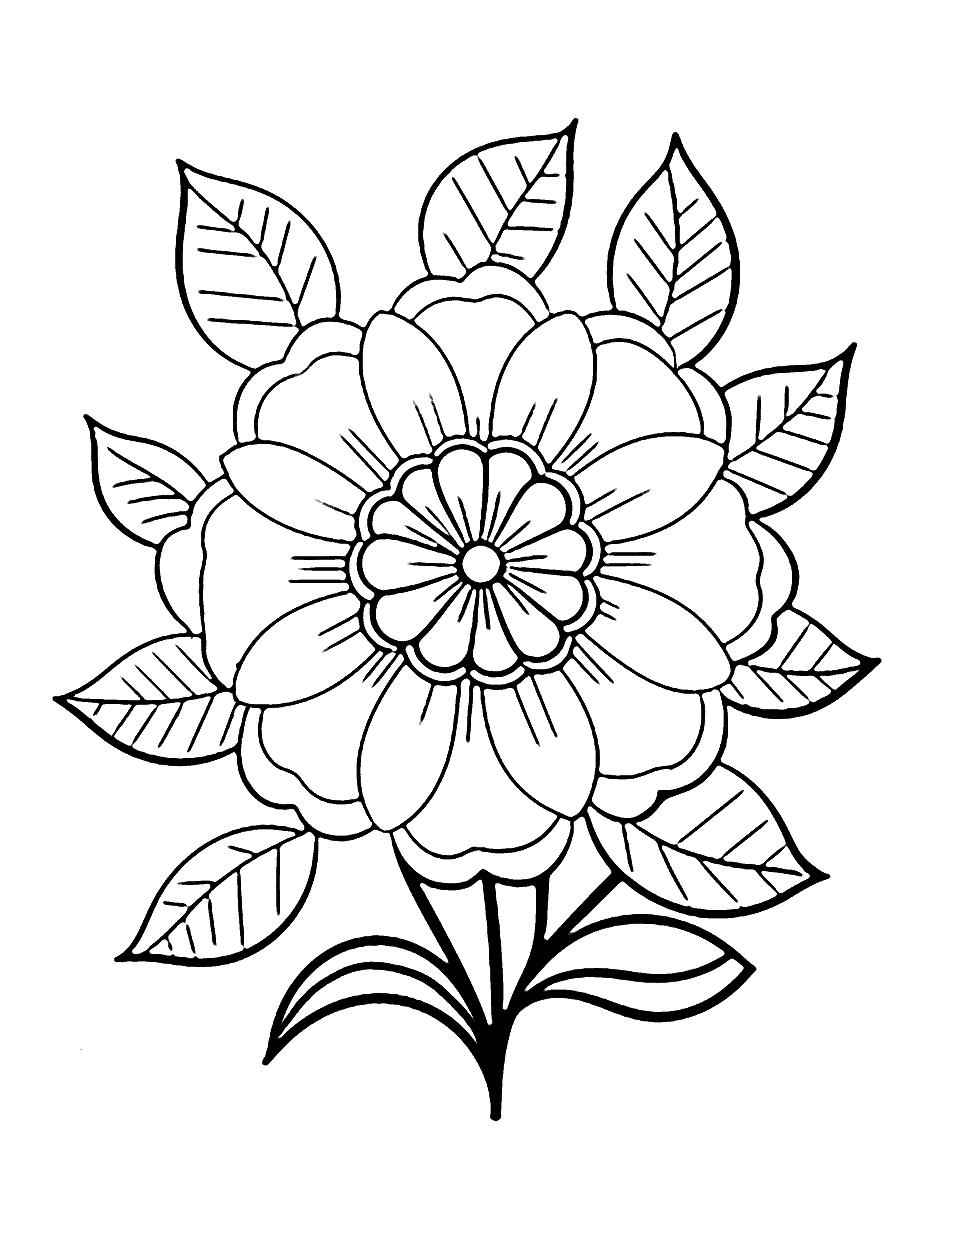 Spring Mandala Flower Coloring Page - A mandala design incorporating spring flowers for a bit of stress relief.